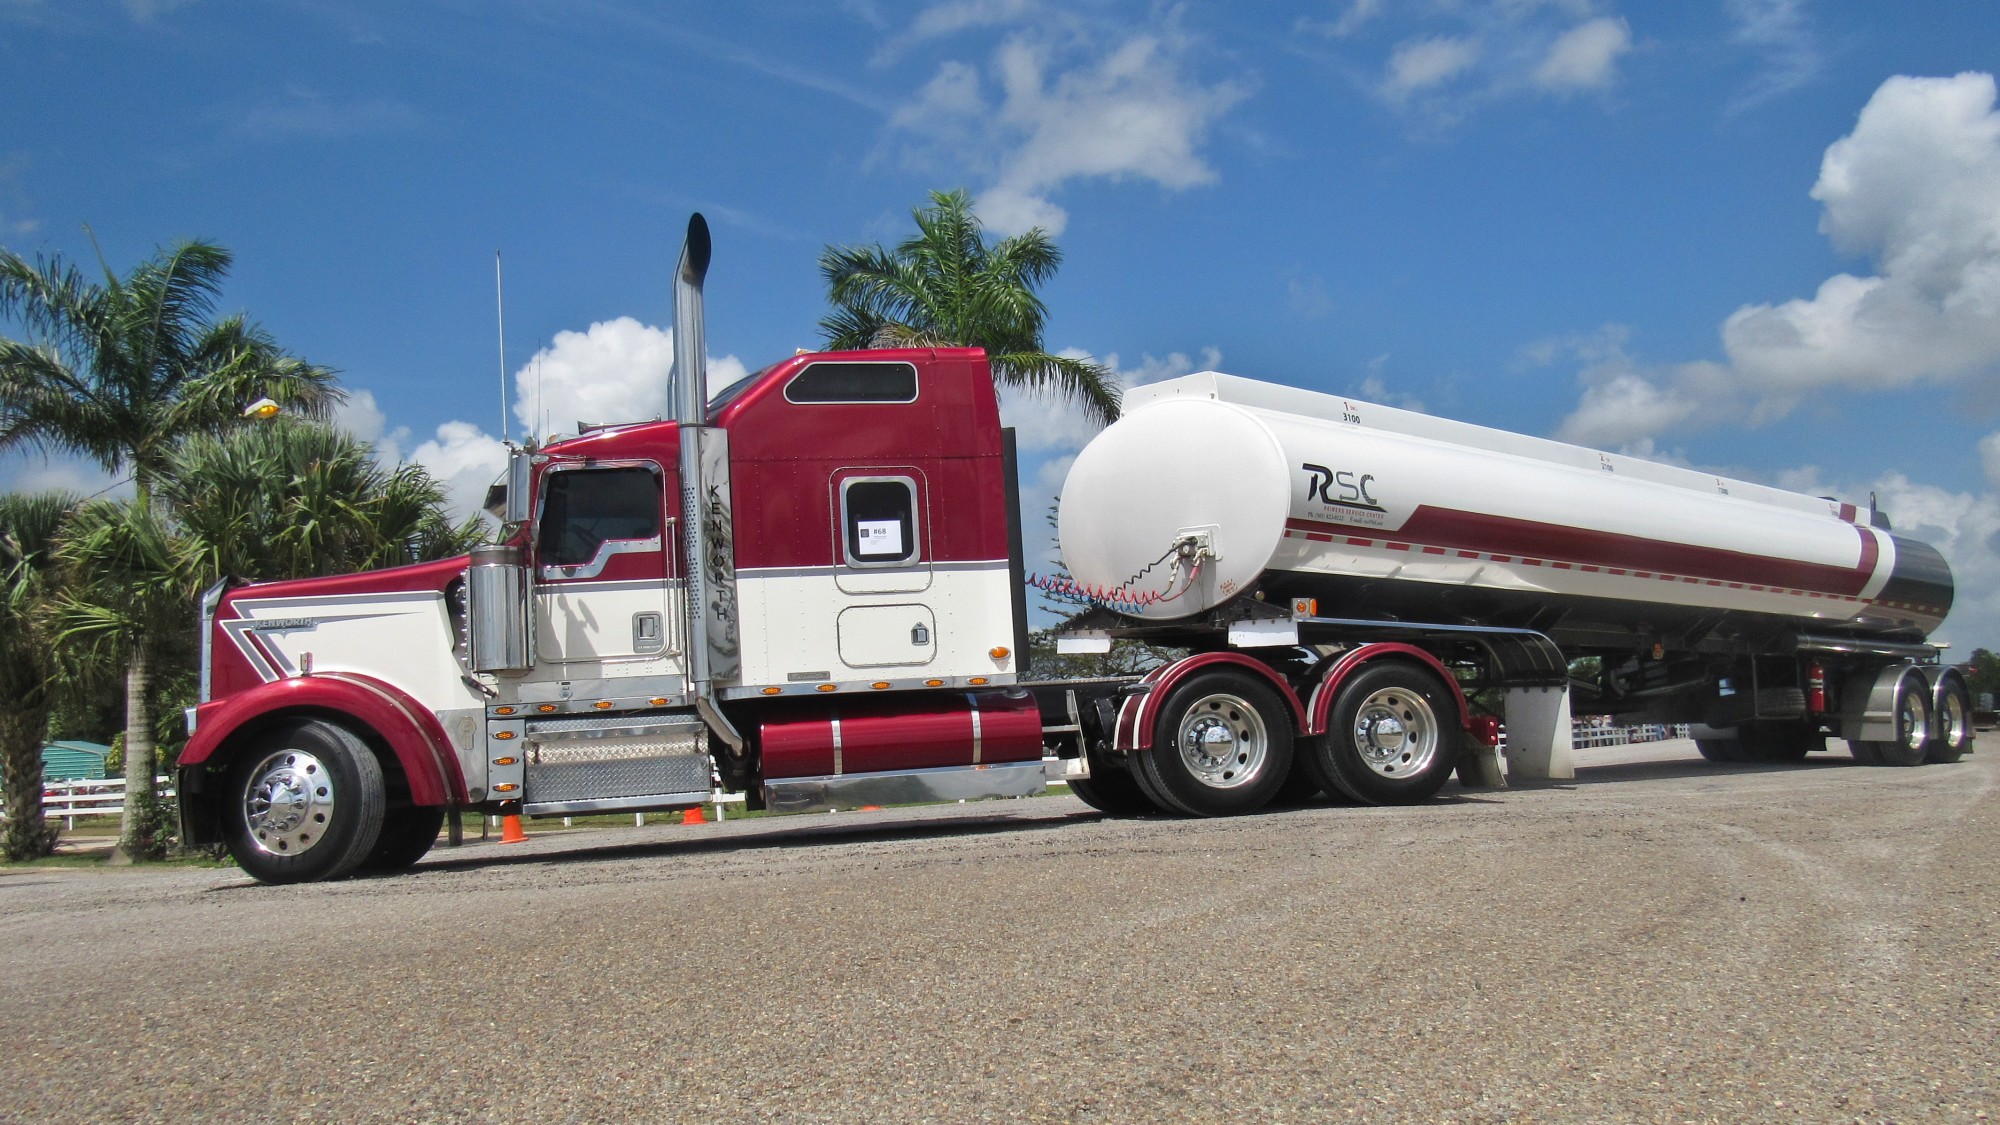 When it comes to cutting costs without sacrificing convenience for your fleet vehicles, explore the benefits of fuel delivery.